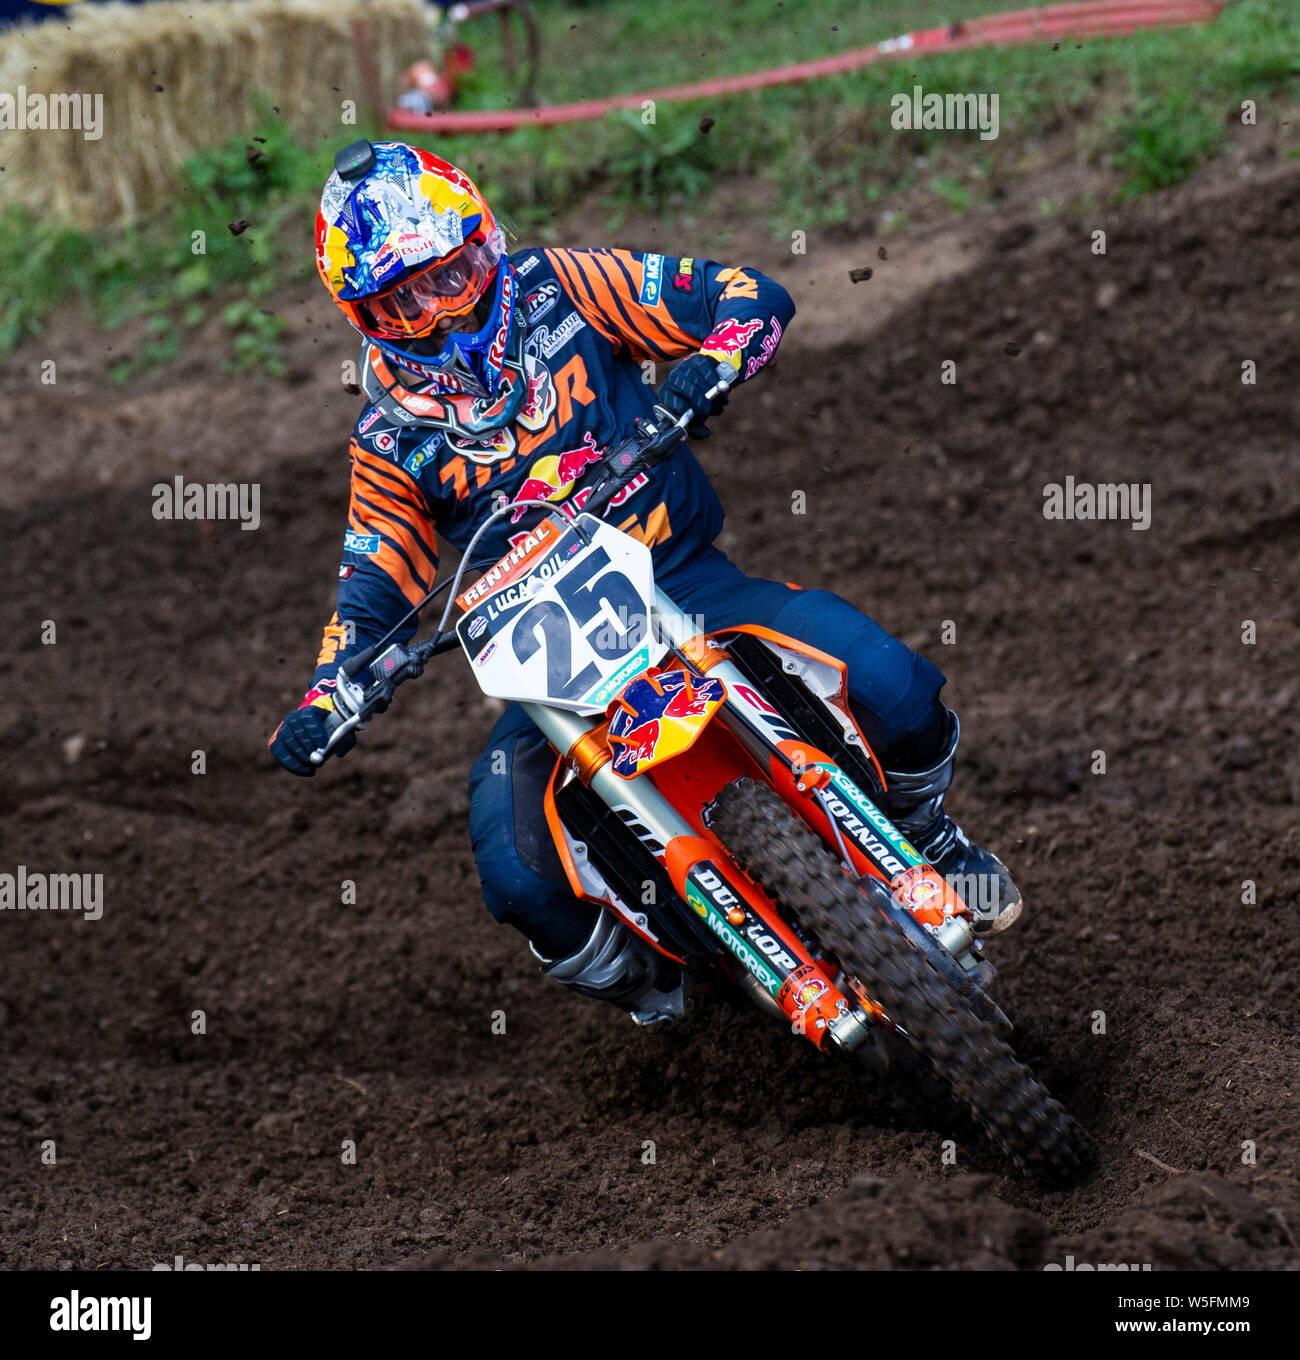 Washougal, WA USA. 27th July, 2019. # 25 Marvin Musqin coming out of turn 25 during the Lucas Oil Pro Motocross Washougal National 450 class championship at Washougal MX park Washougal, WA Thurman James/CSM/Alamy Live News Stock Photo